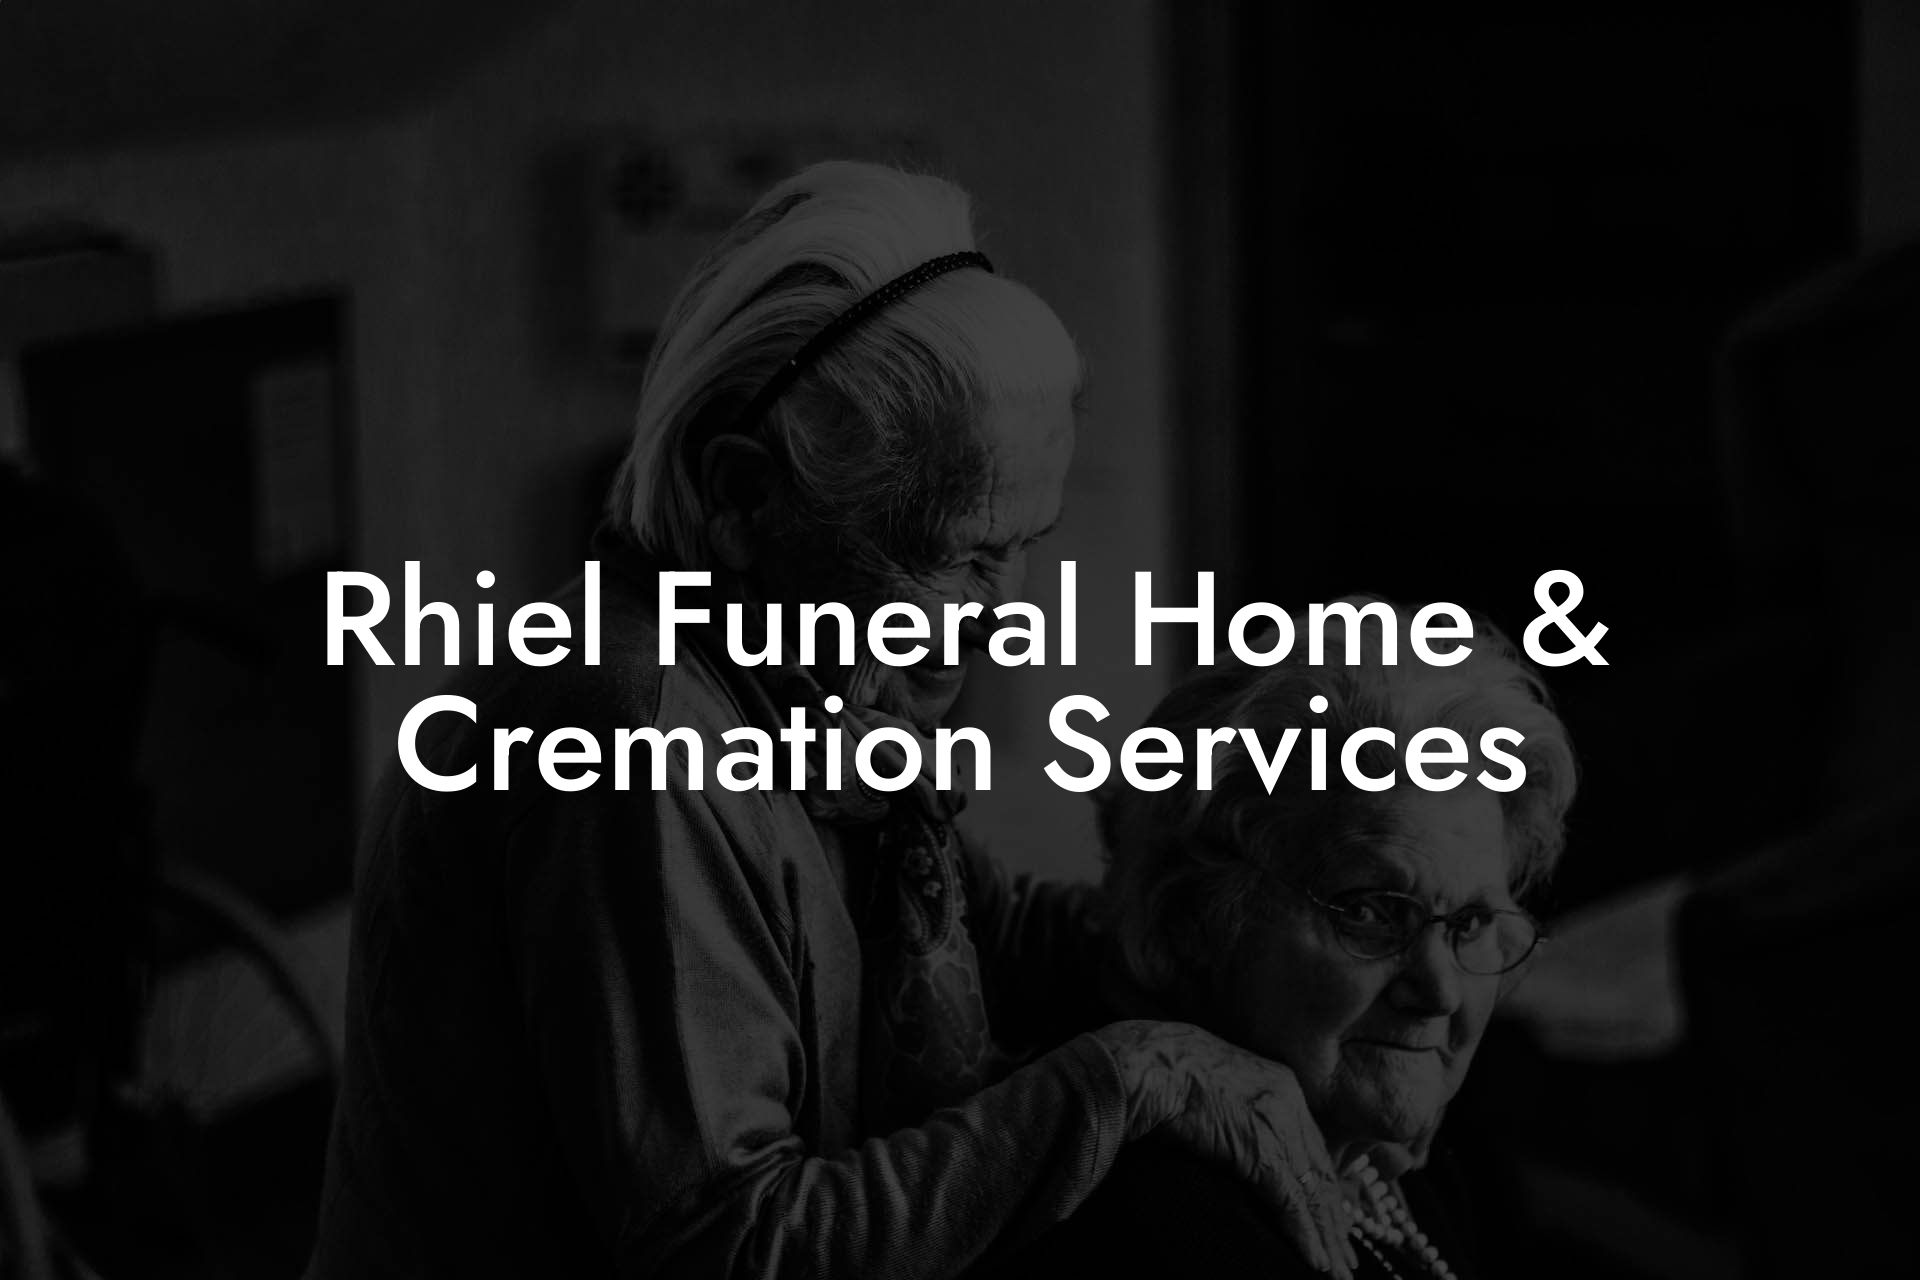 Rhiel Funeral Home & Cremation Services